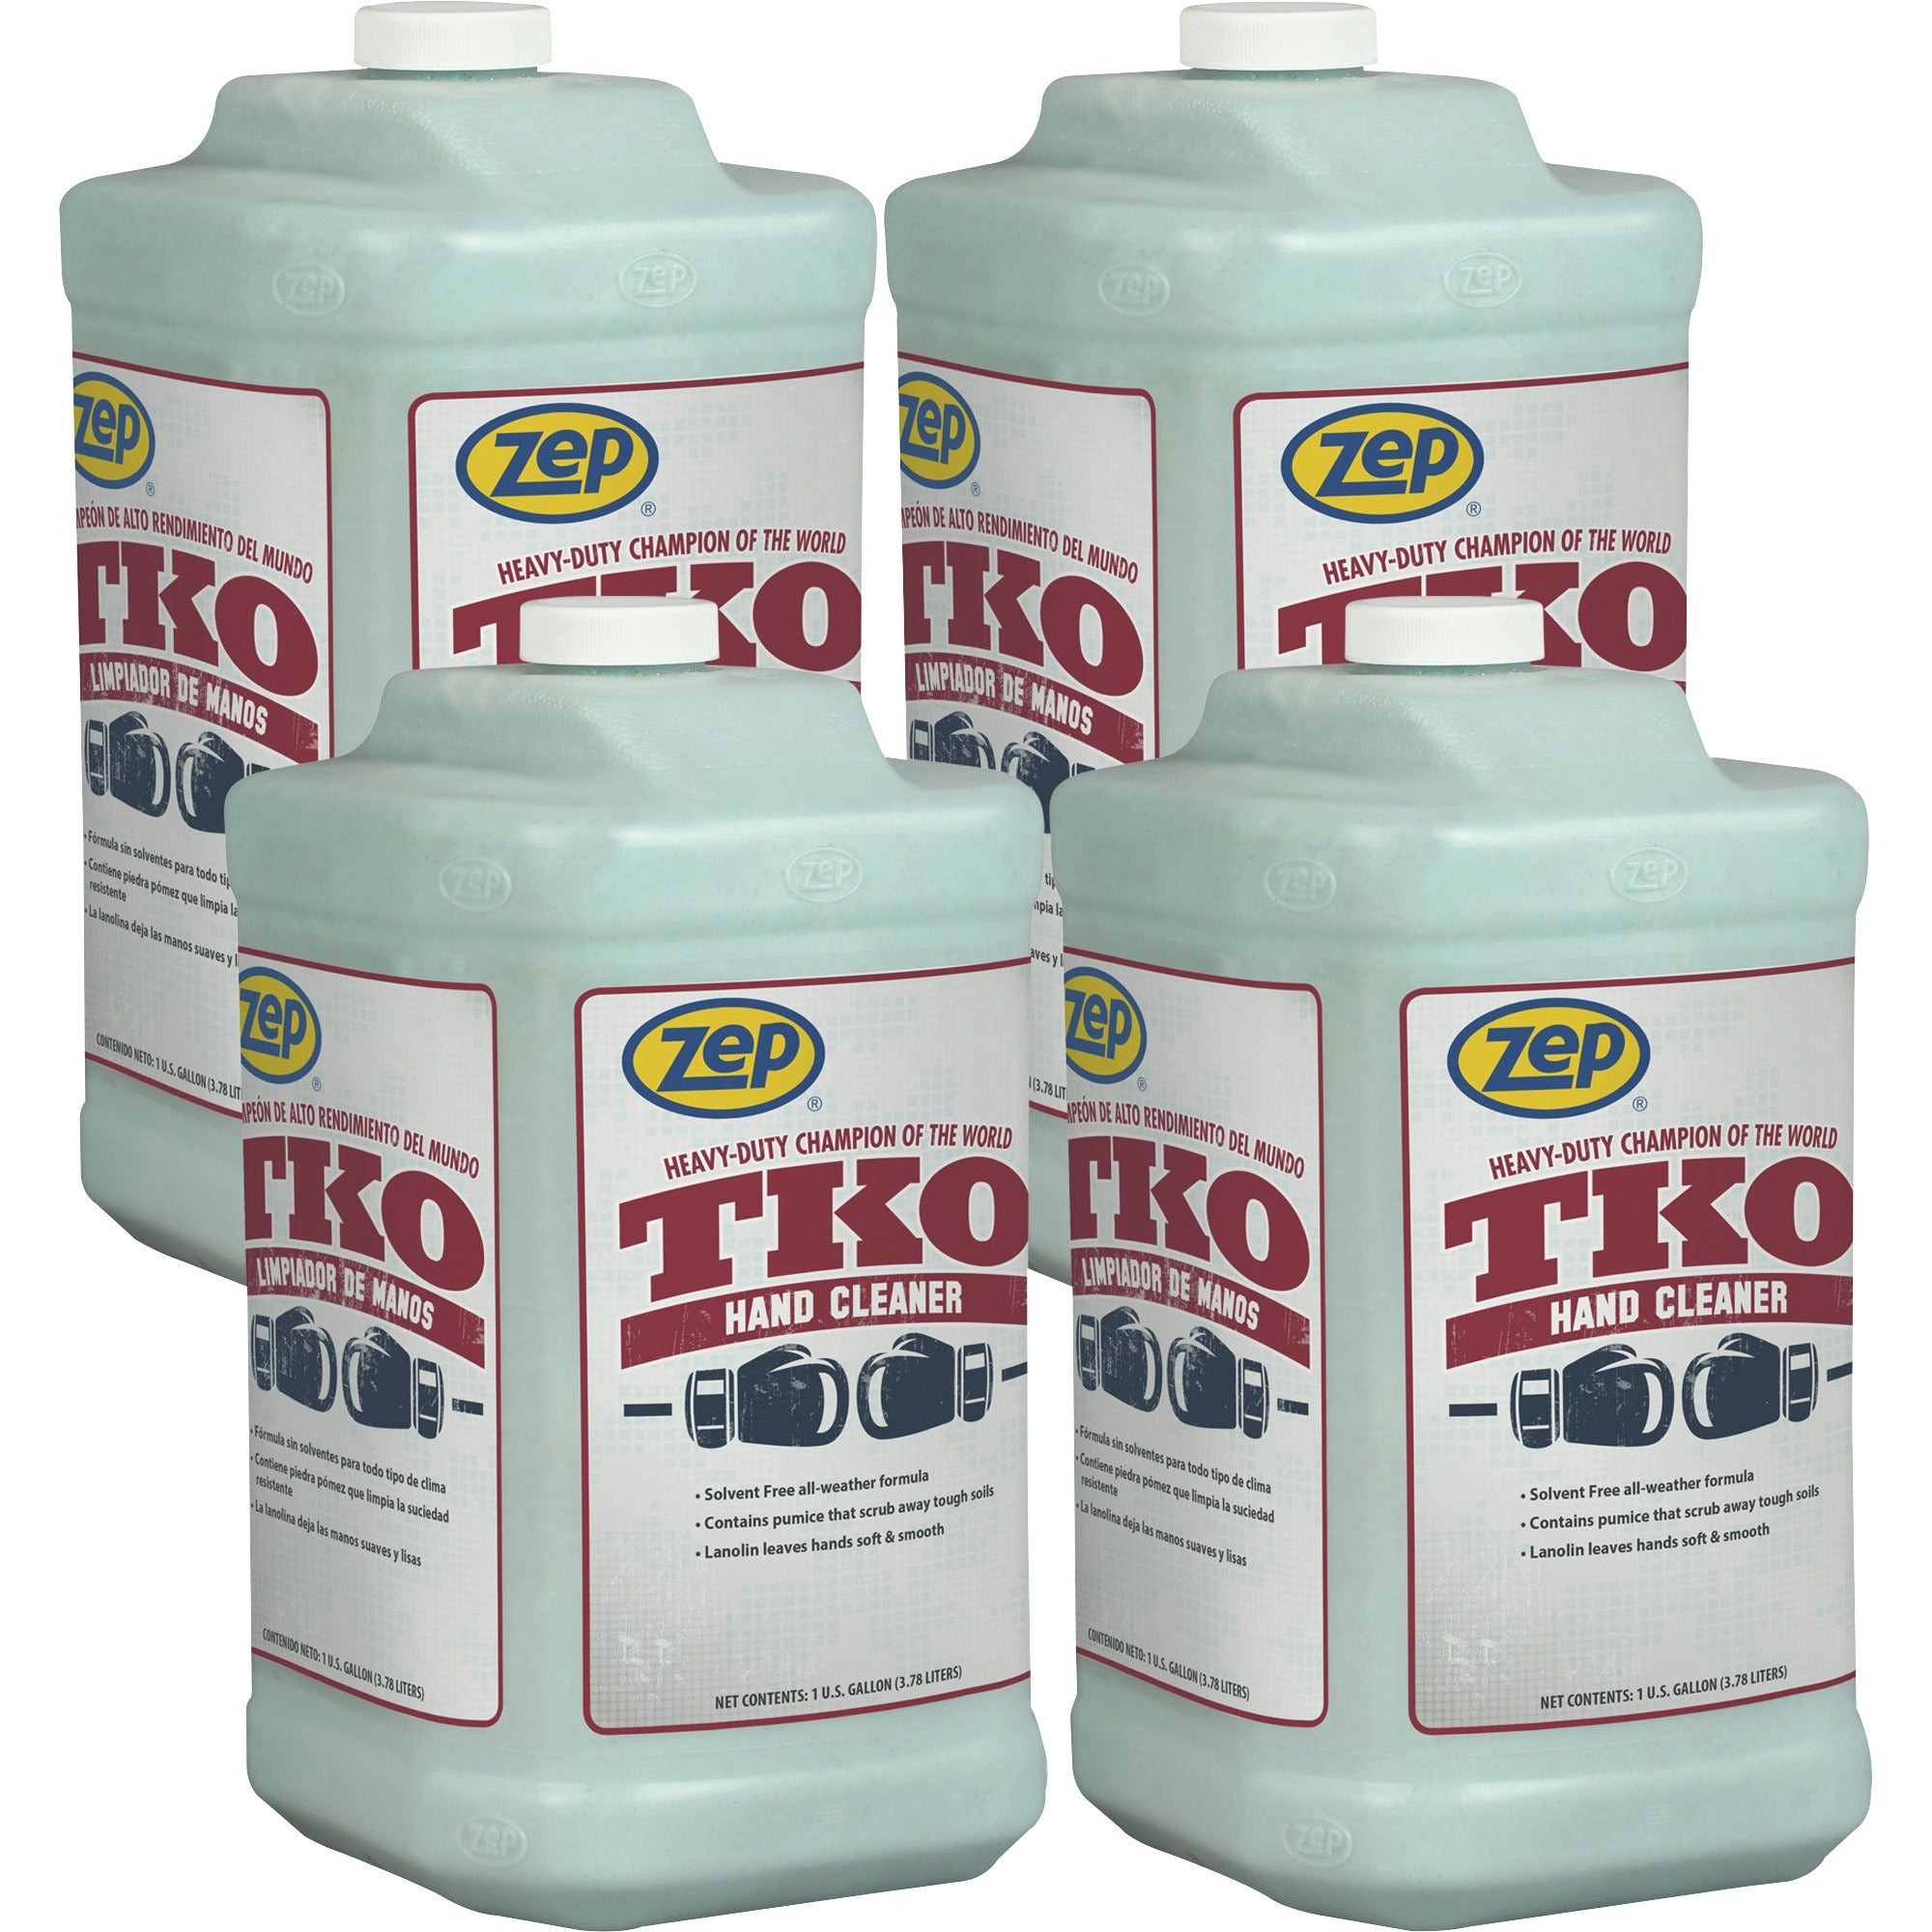 zep-tko-hand-cleaner-lemon-lime-scentfor-1-gal-38-l-dirt-remover-grime-remover-grease-remover-hand-blue-opaque-solvent-free-heavy-duty-non-flammable-4-carton_zper54824ct - 1